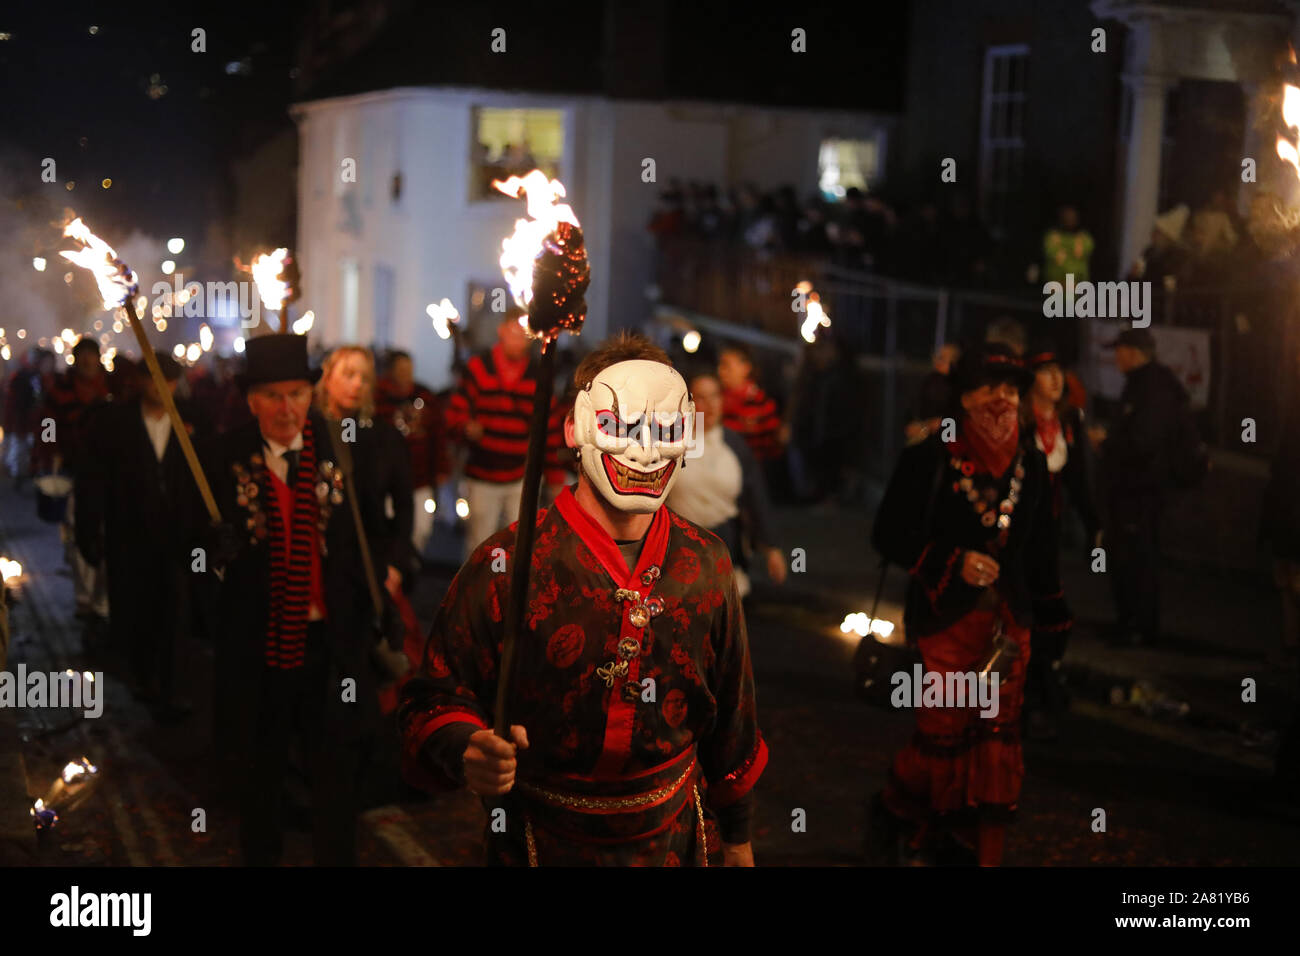 Lewes,UK.5th Nov 2019.Thousands of people flocked to Lewes this evening as the town celebrated its annual bonfire night tradition.Lewes, East Sussex,UK.Credit:Ed Brown/Alamy Live News Stock Photo